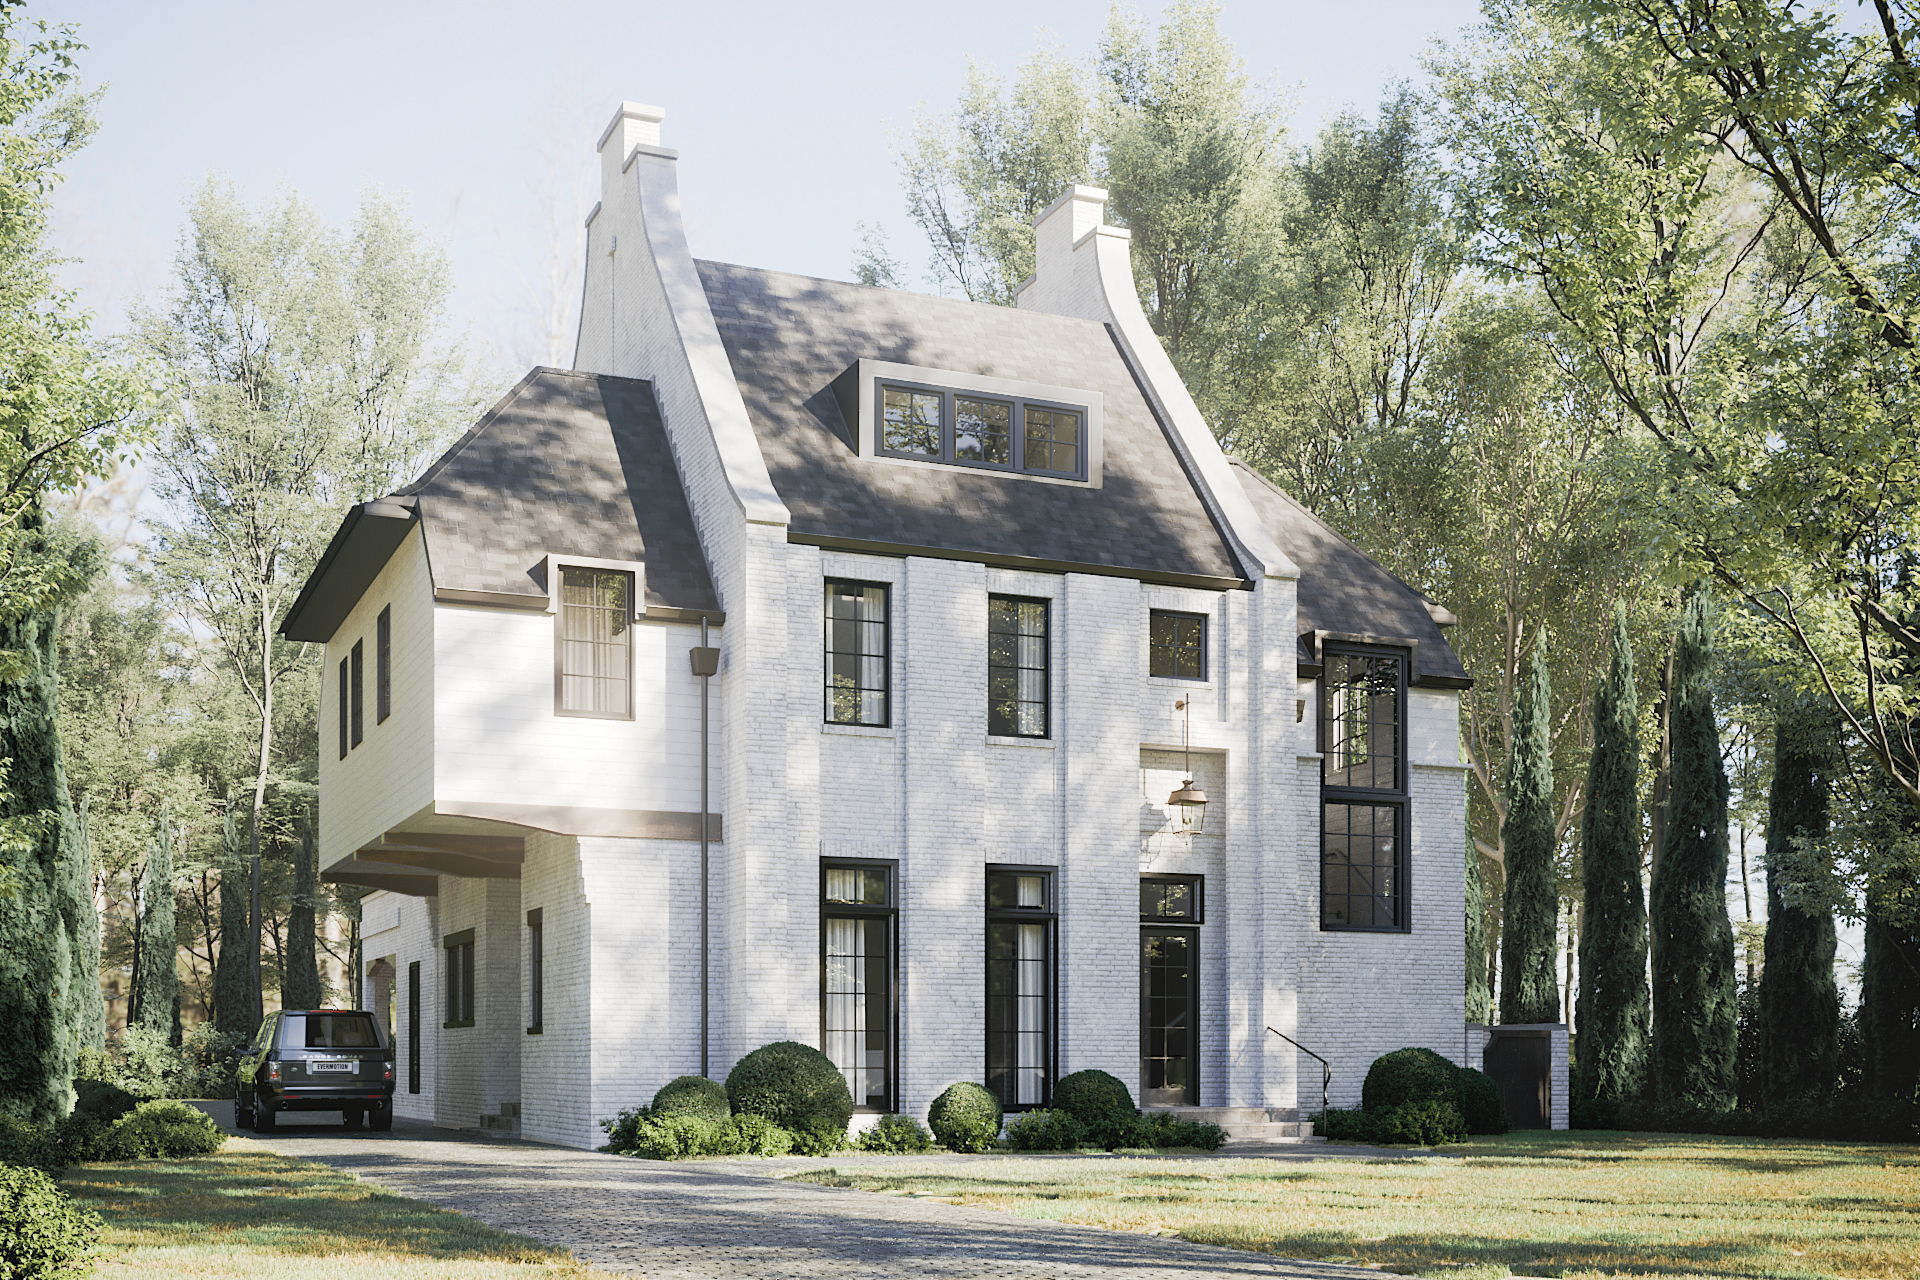 Houzz for Architects: a CG Visualization of a Stylish House